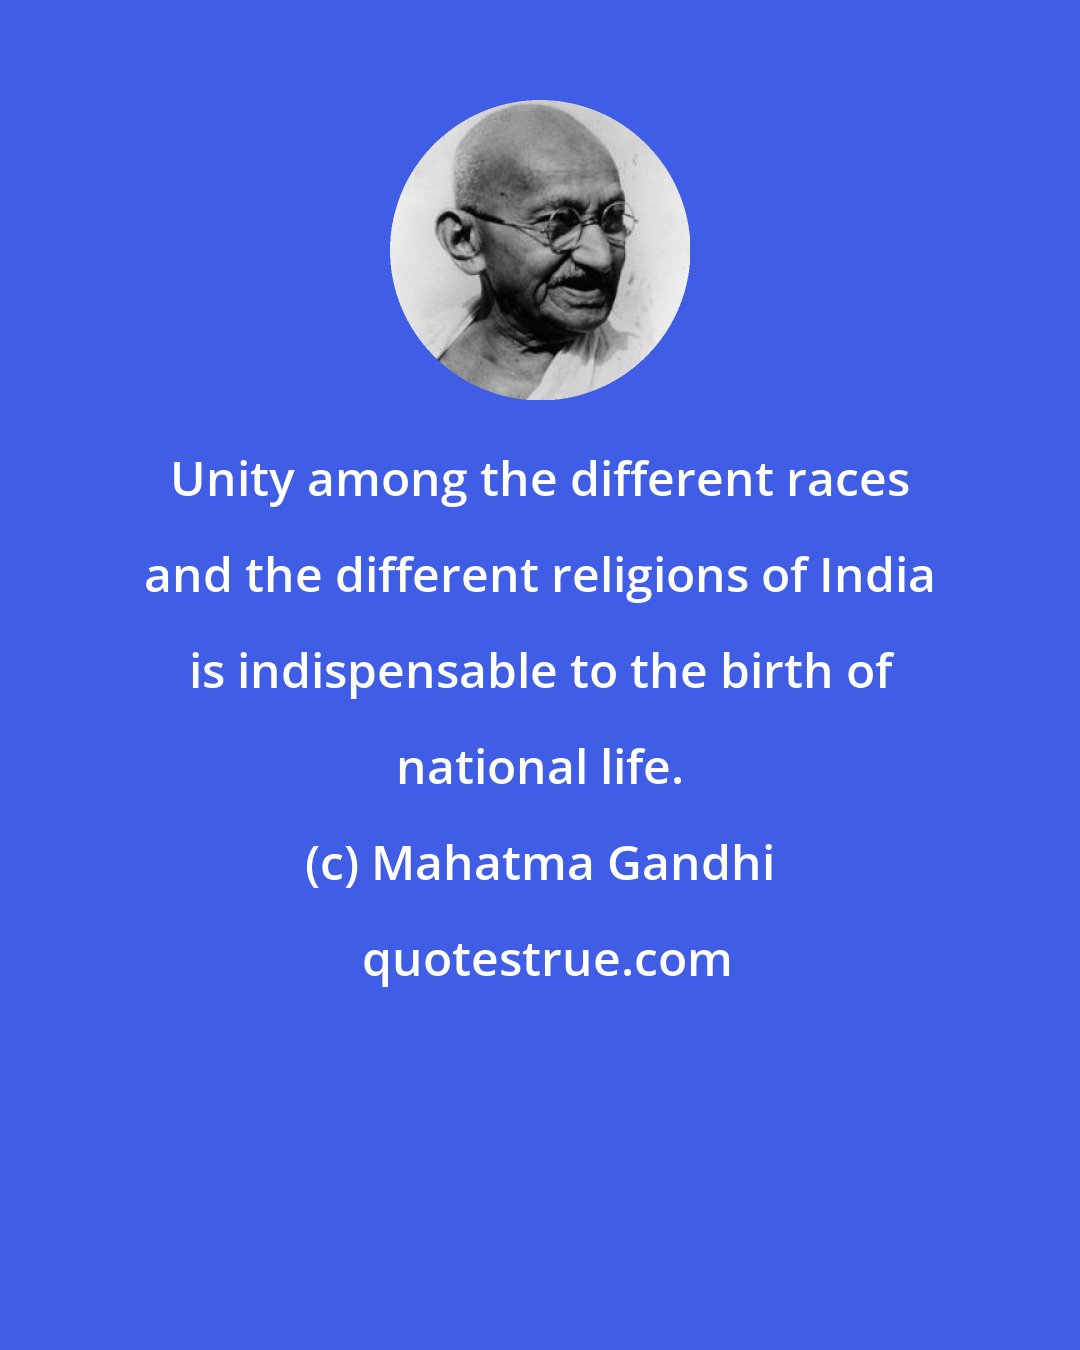 Mahatma Gandhi: Unity among the different races and the different religions of India is indispensable to the birth of national life.